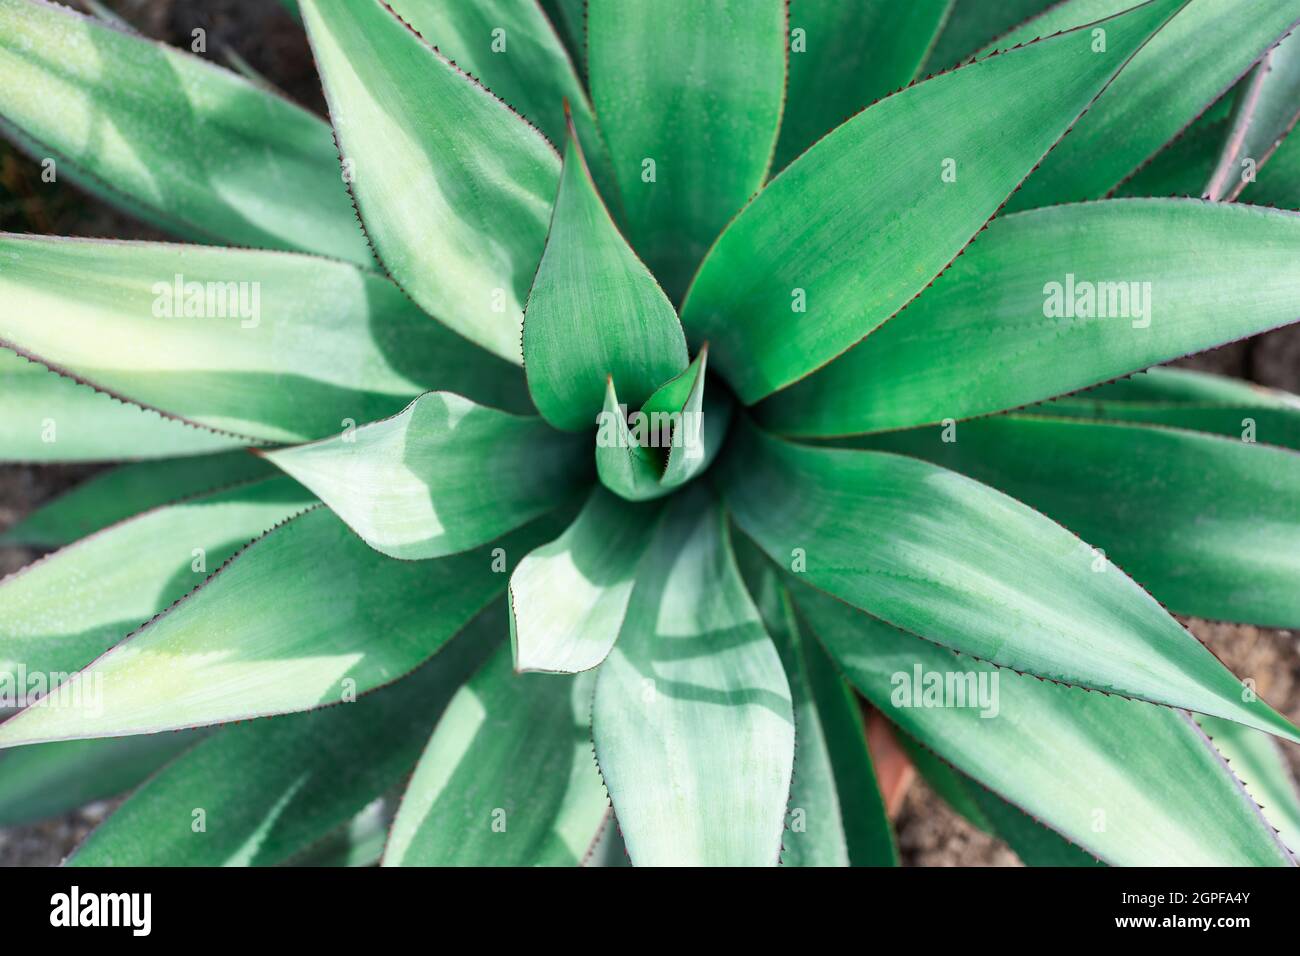 Green leaf texture of agave plant. Natural background. Stock Photo